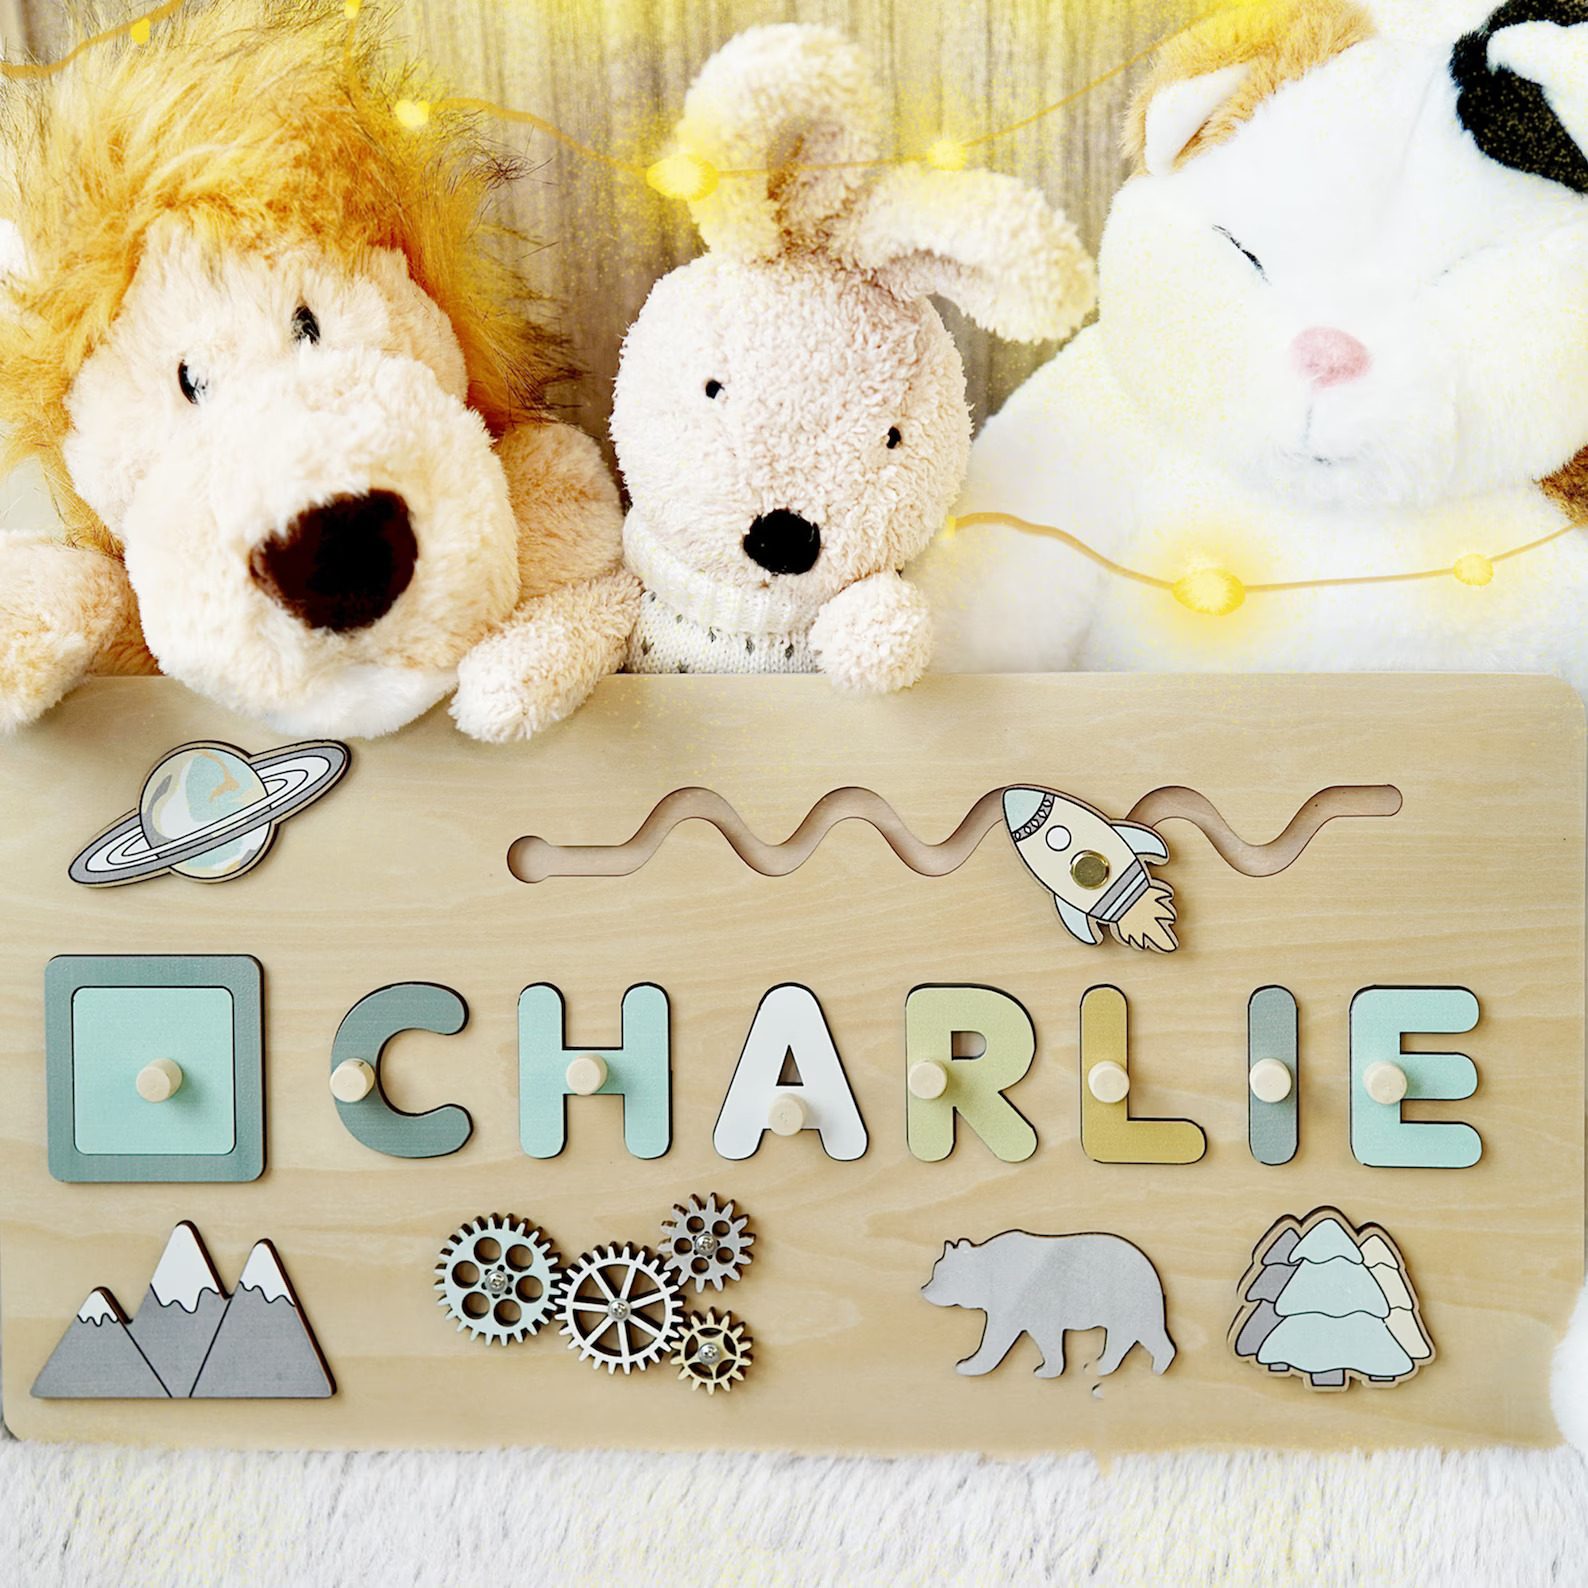 Baby Gifts - Personalized Baby Gifts for Boys - Words with Boards, LLC